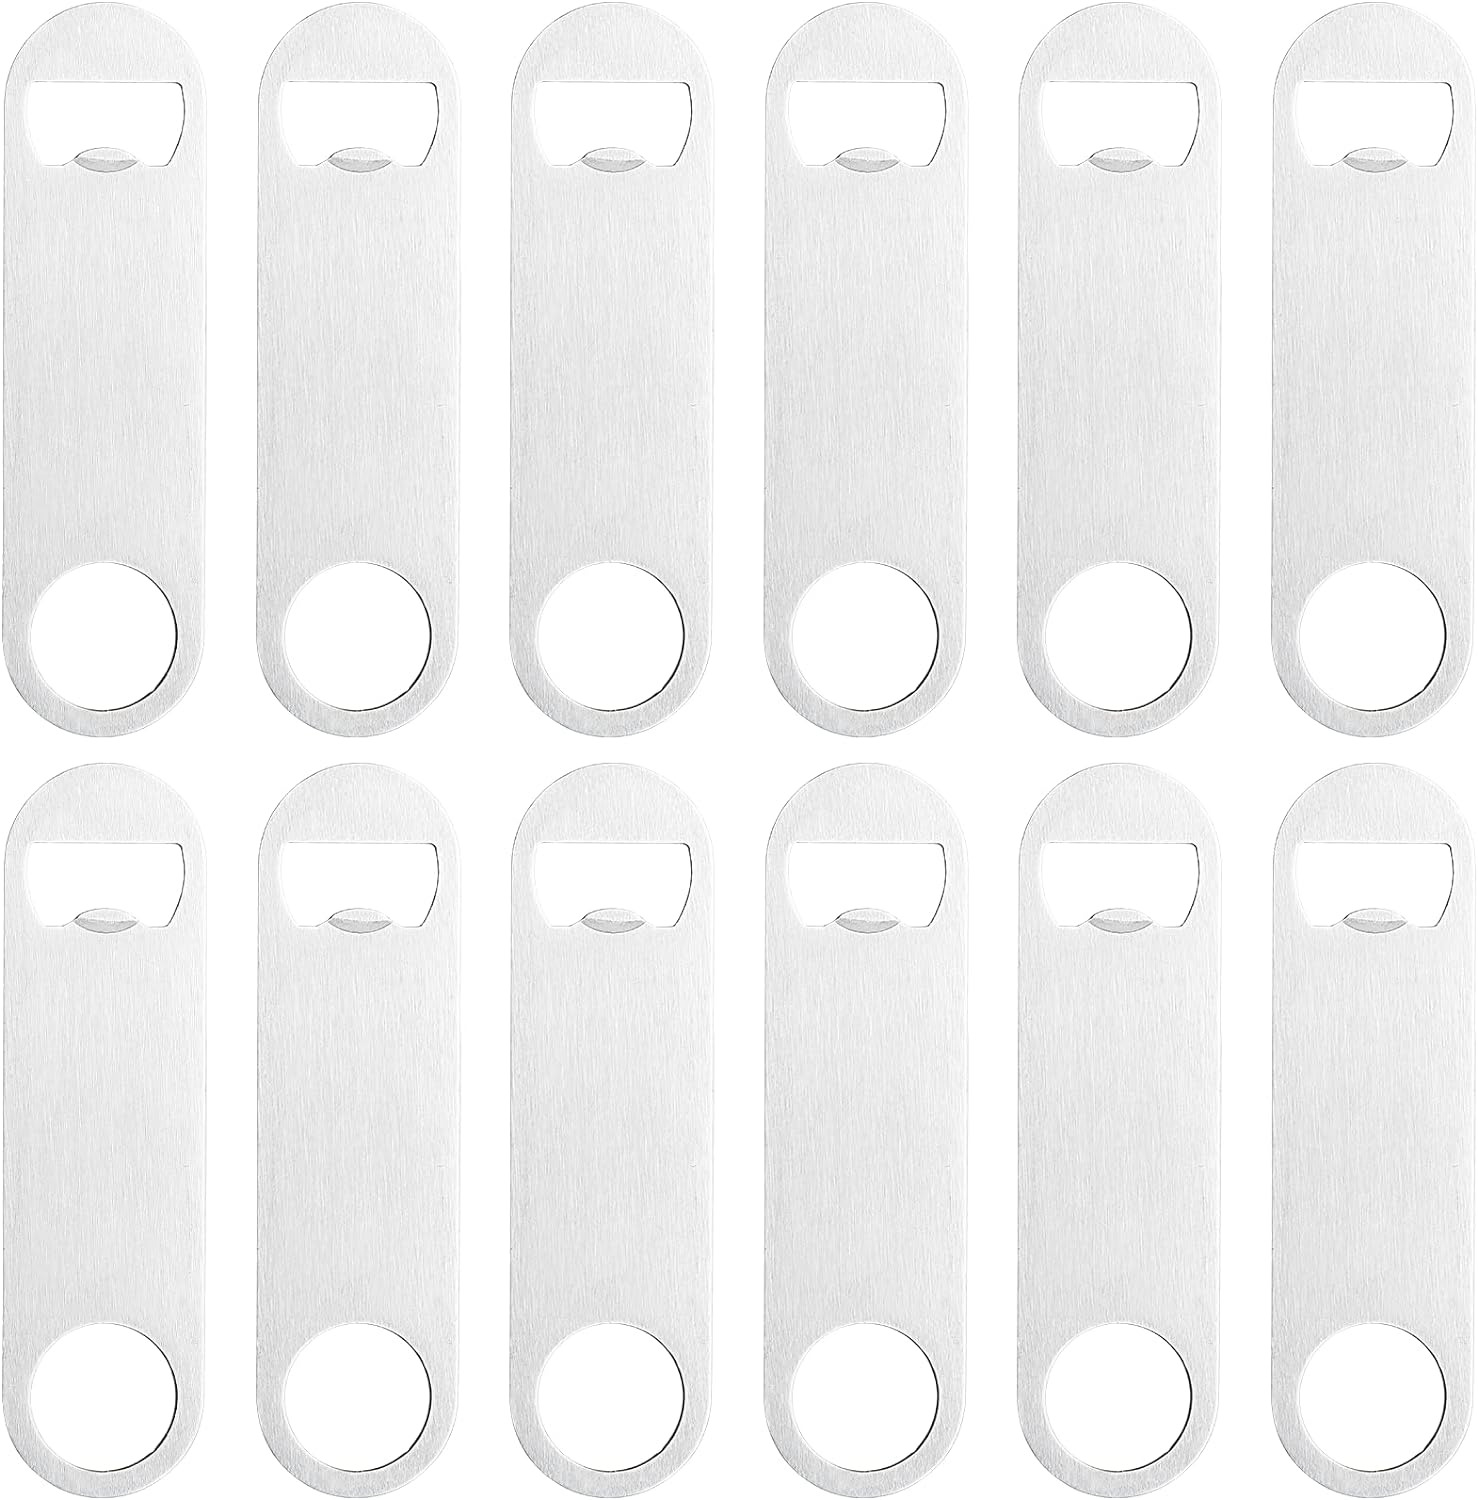 12 Pcs Flat Bottle Opener 4.9 X1.18 Inches Stainless Steel Beer Bottle Openers H